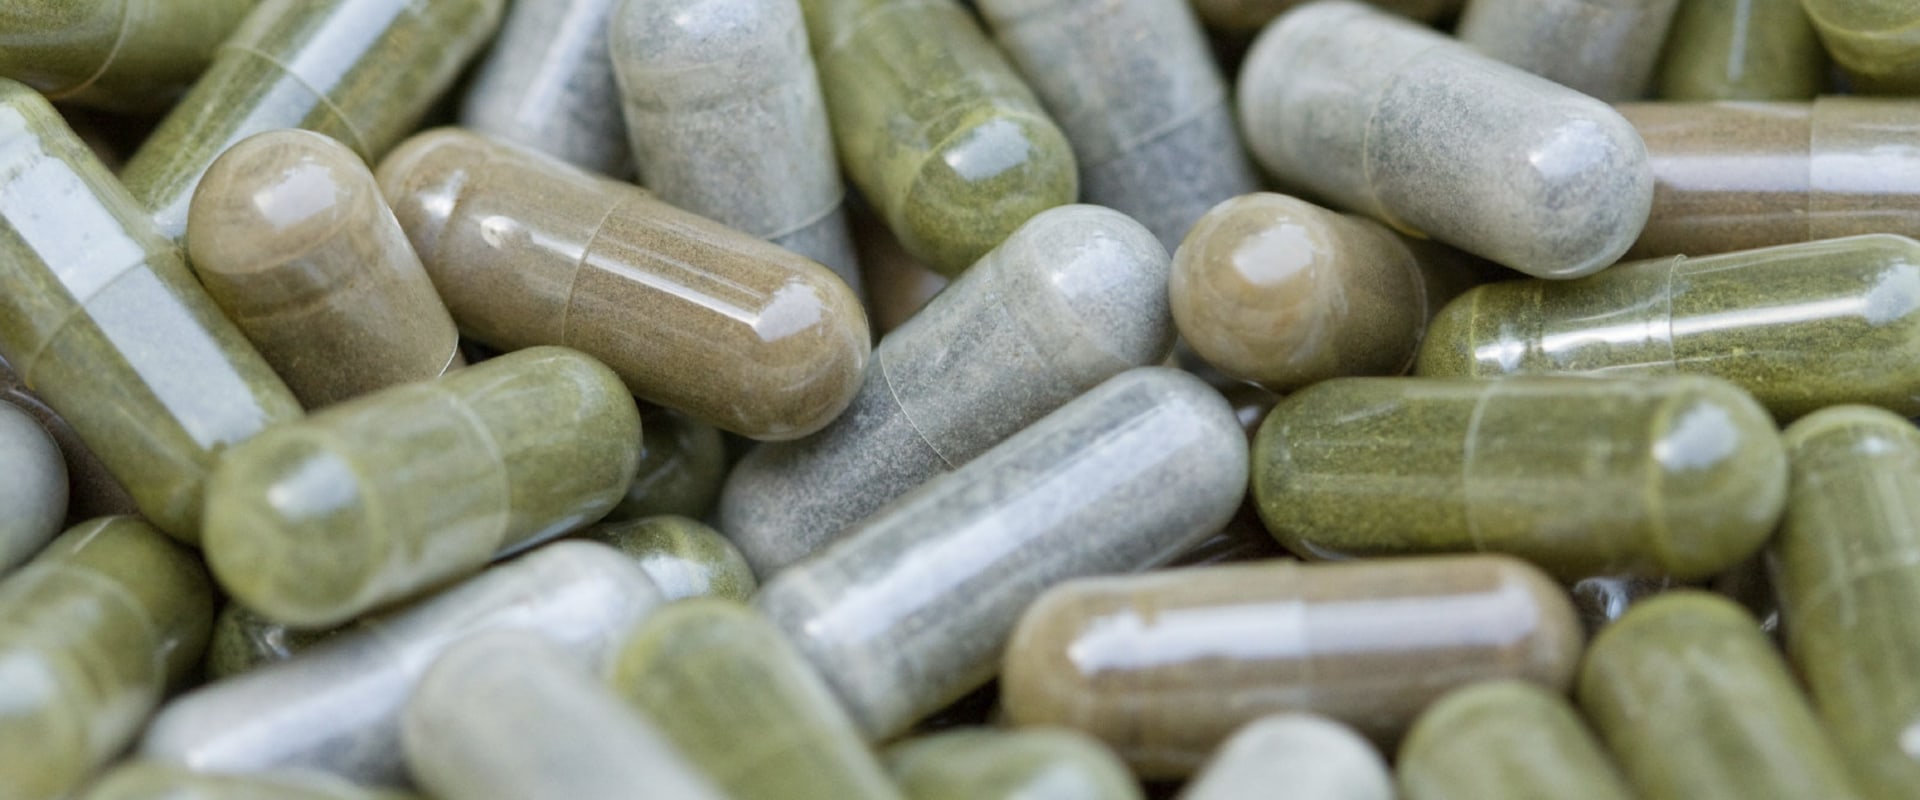 Can Dietary and Herbal Supplements Lead to Overdose? Symptoms and Treatment